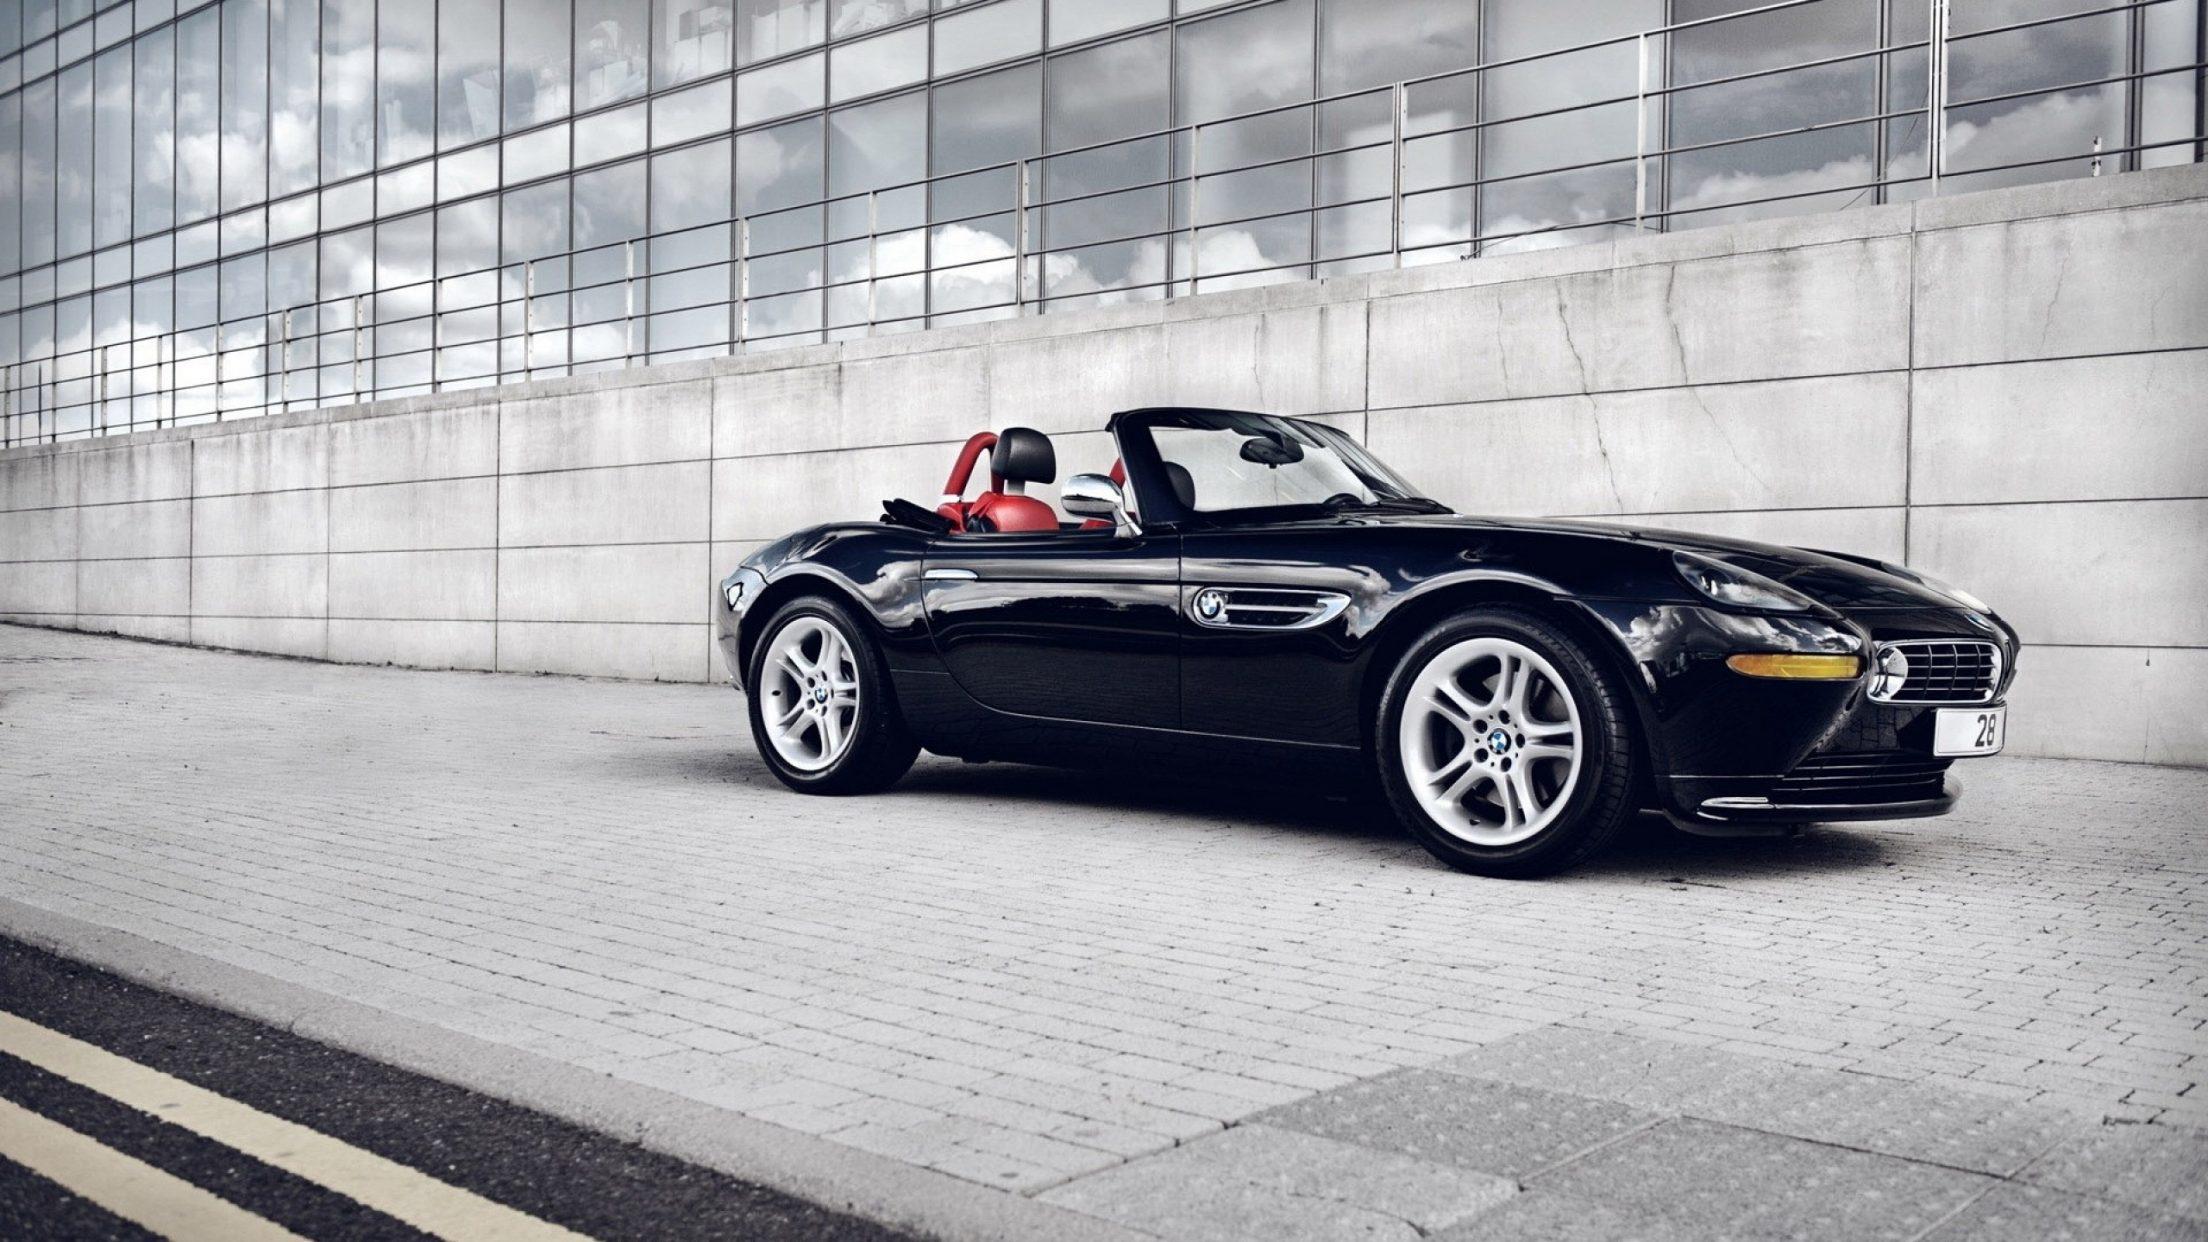 HD Wallpaper Of A Black BMW Z8 [Viewed From The Side]